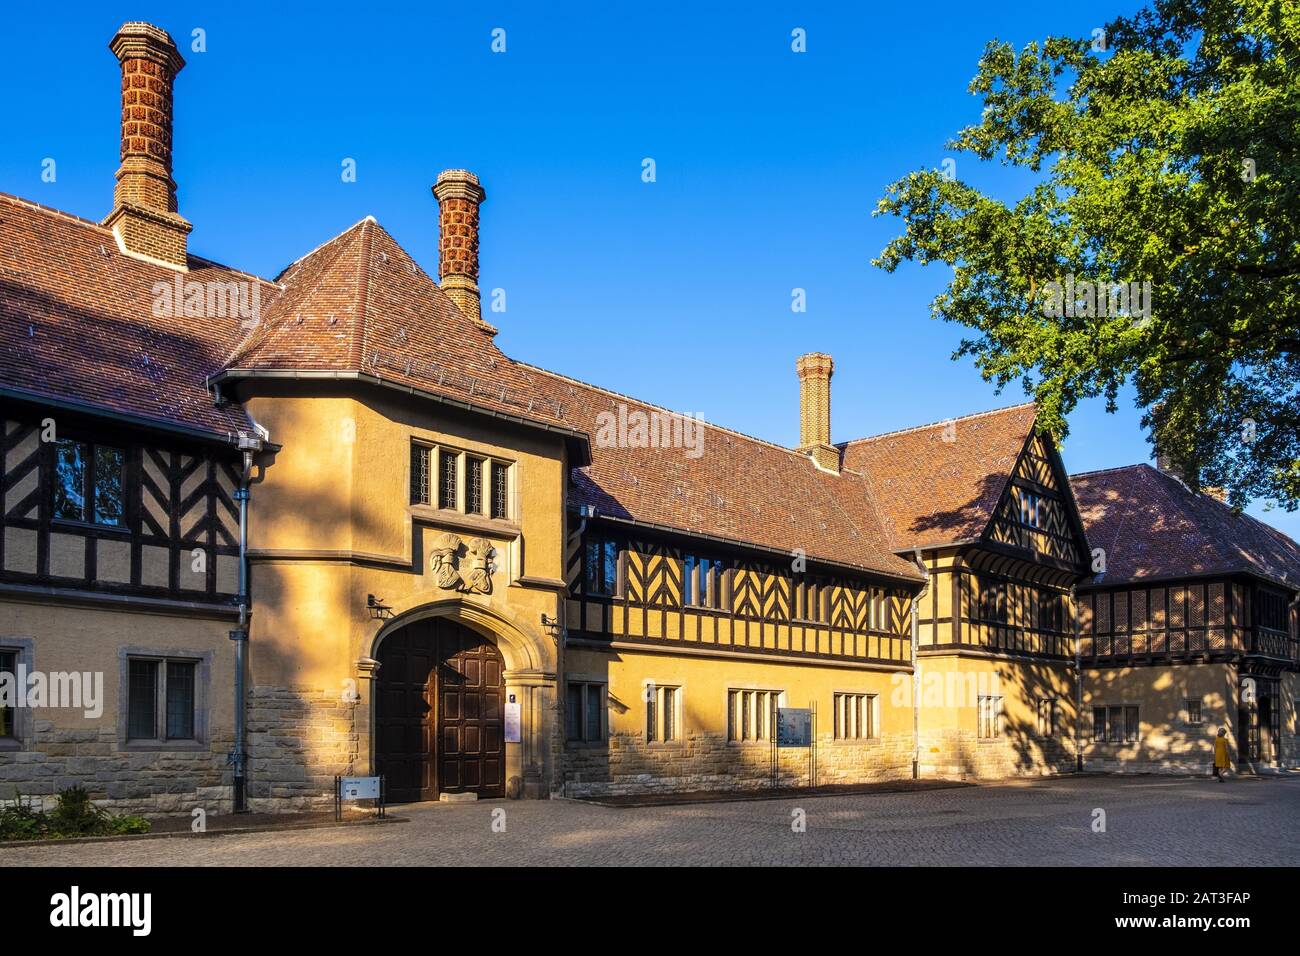 Potsdam, Brandenburg / Germany - 2018/07/29: Exterior of the Cecilienhof Palace - Cecilienhof Schloss - historic place of the Potsdam Conference of 1945 within the New Park complex Stock Photo